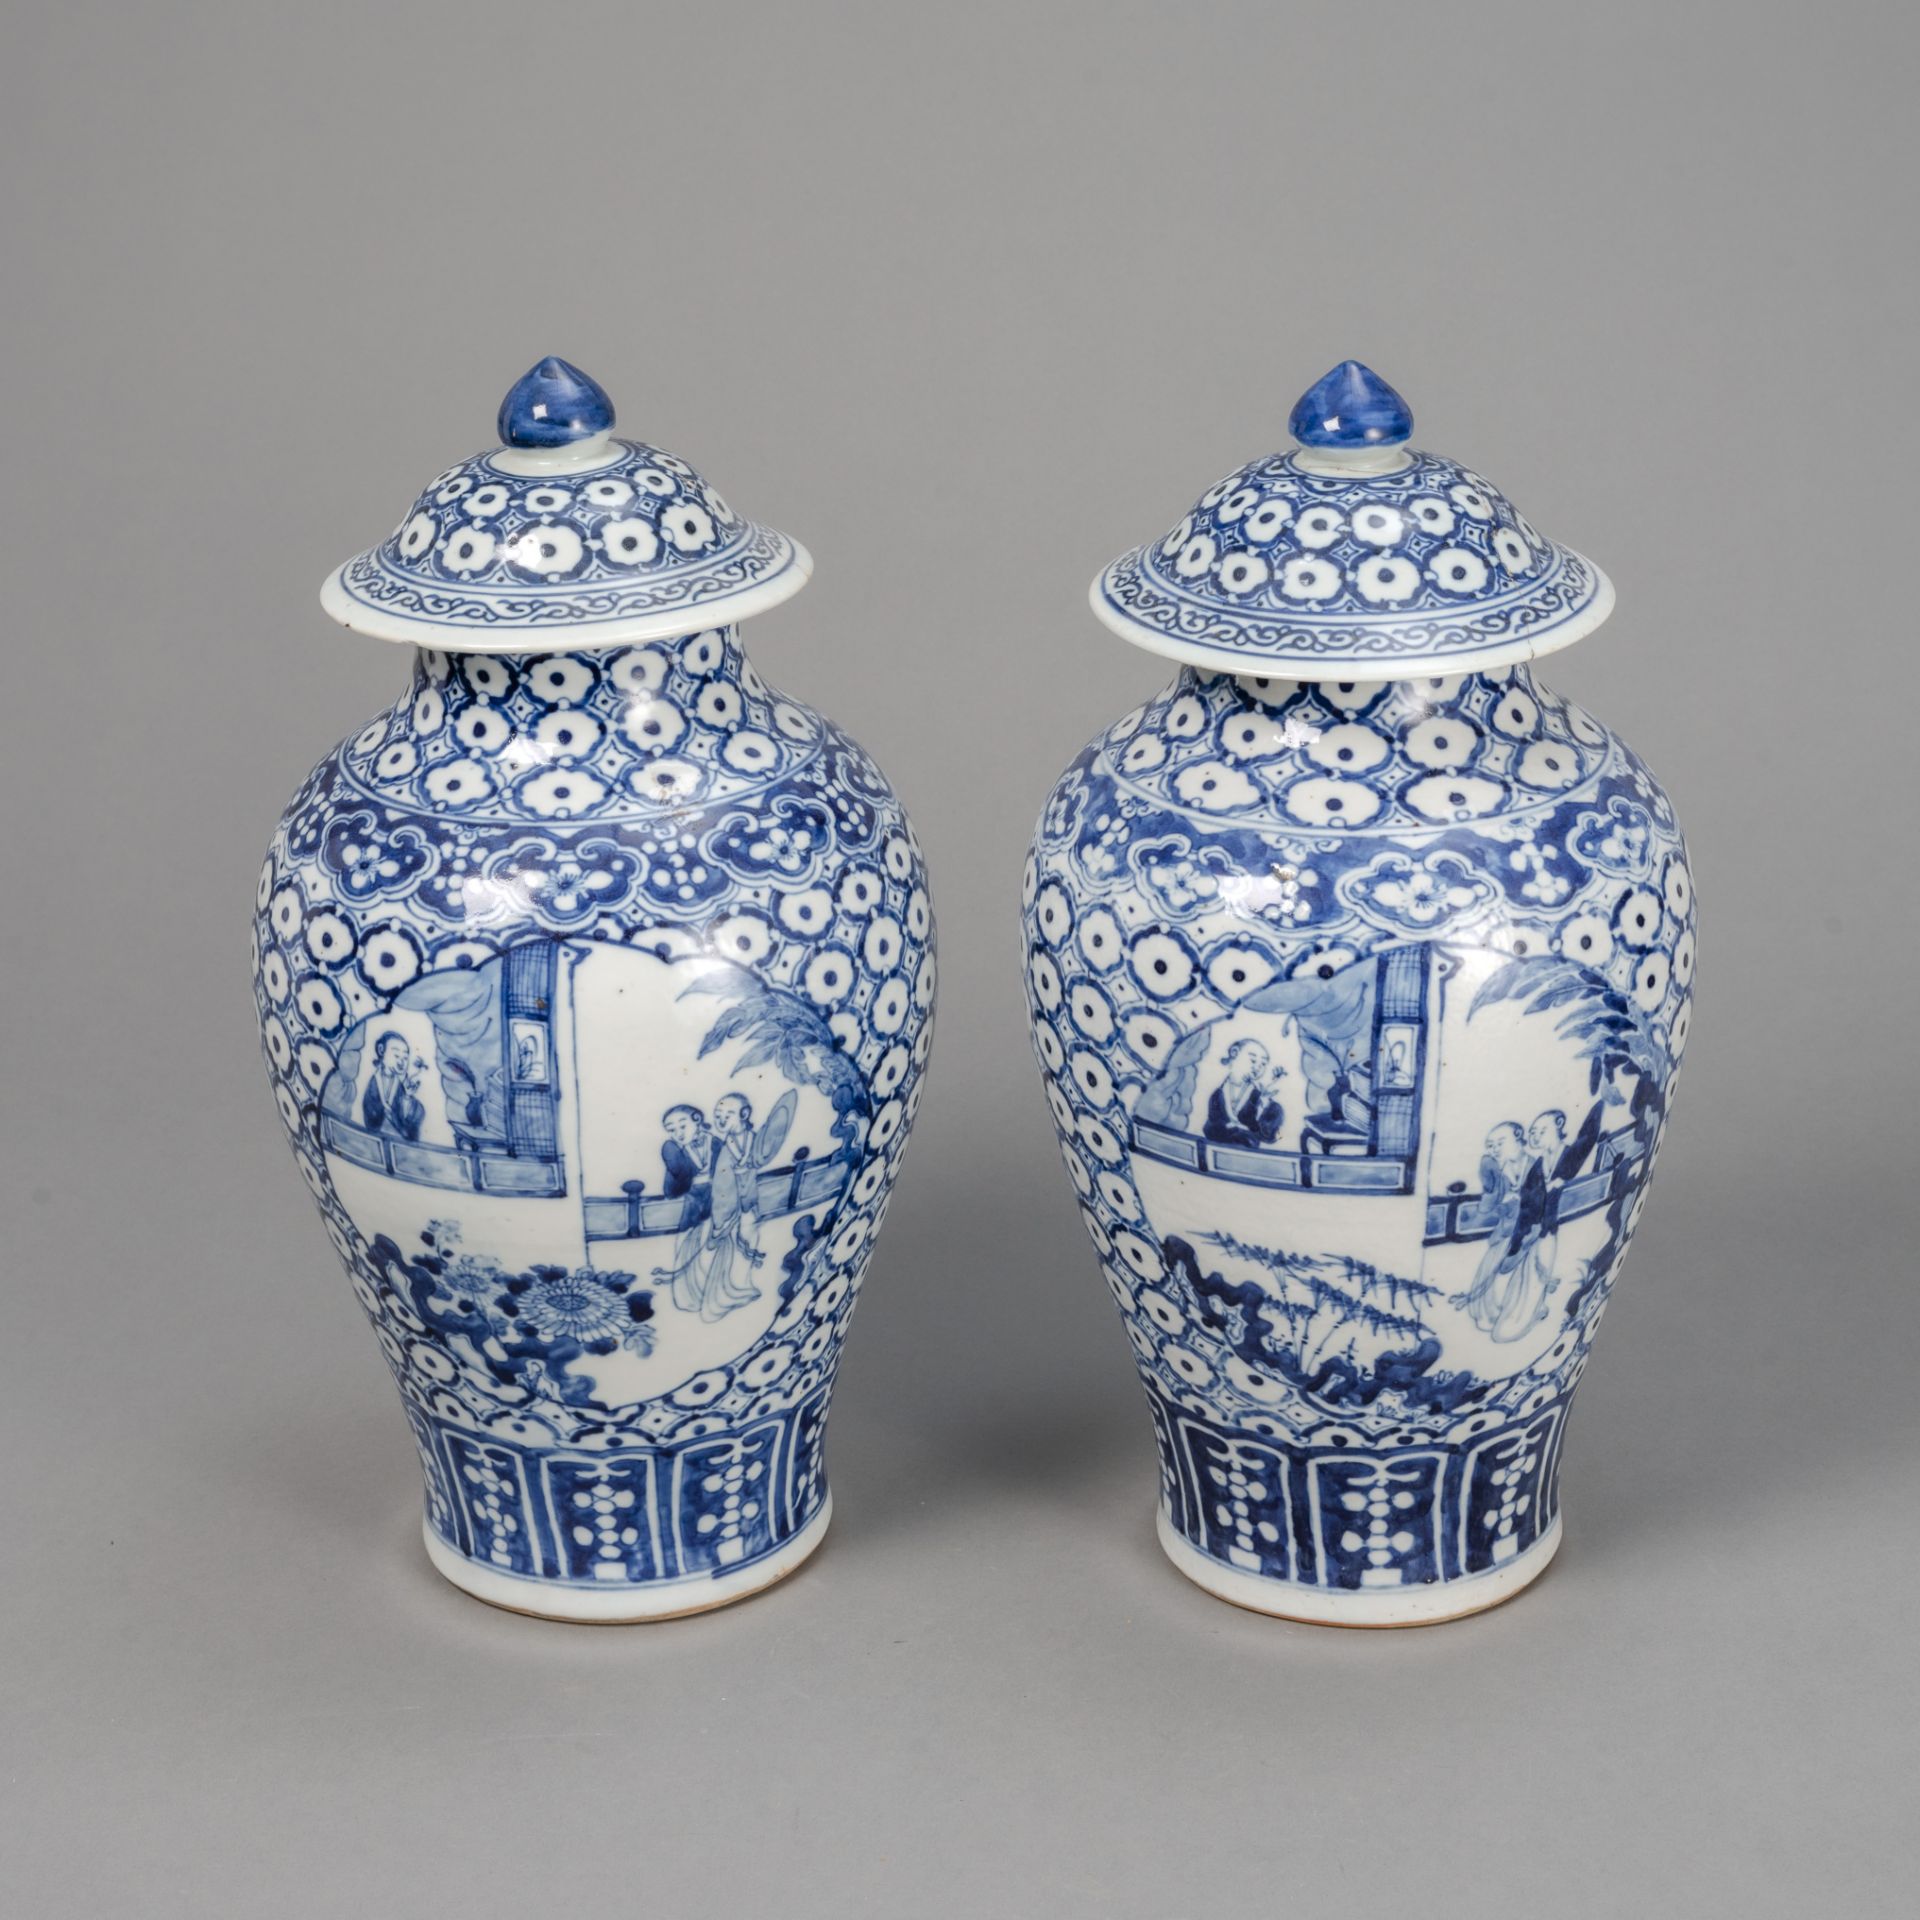 A PAIR OF UNDERGLAZE-BLUE PAINTED PORCELAIN VASES WITH COVERS